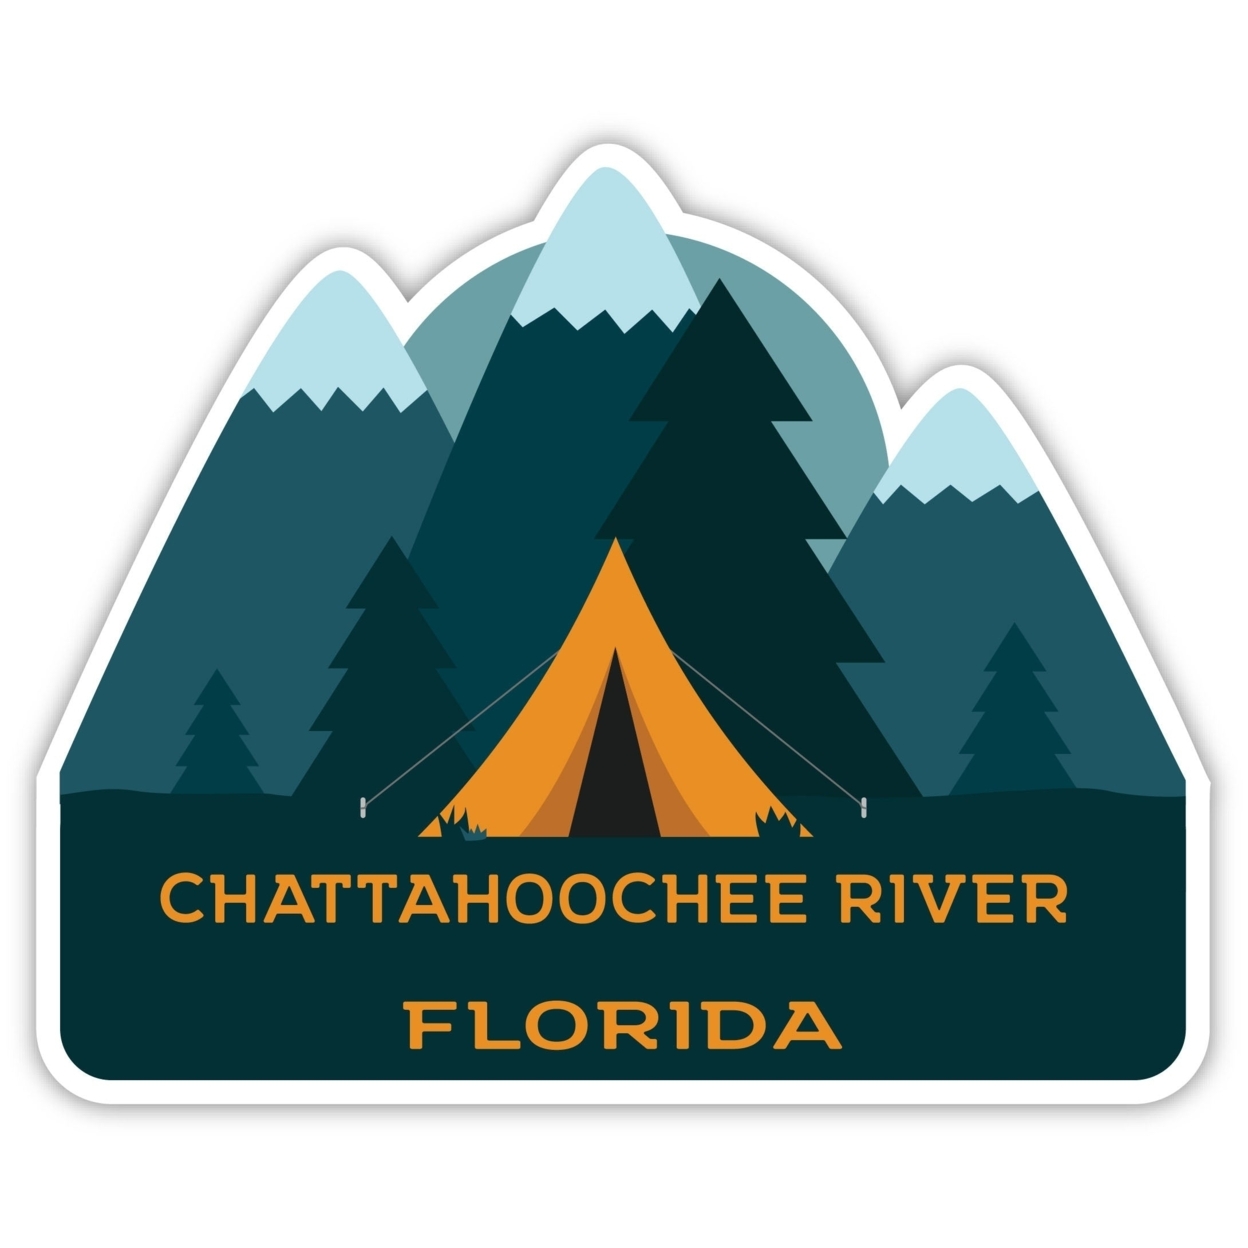 Chattahoochee River Florida Souvenir Decorative Stickers (Choose Theme And Size) - 4-Pack, 12-Inch, Tent